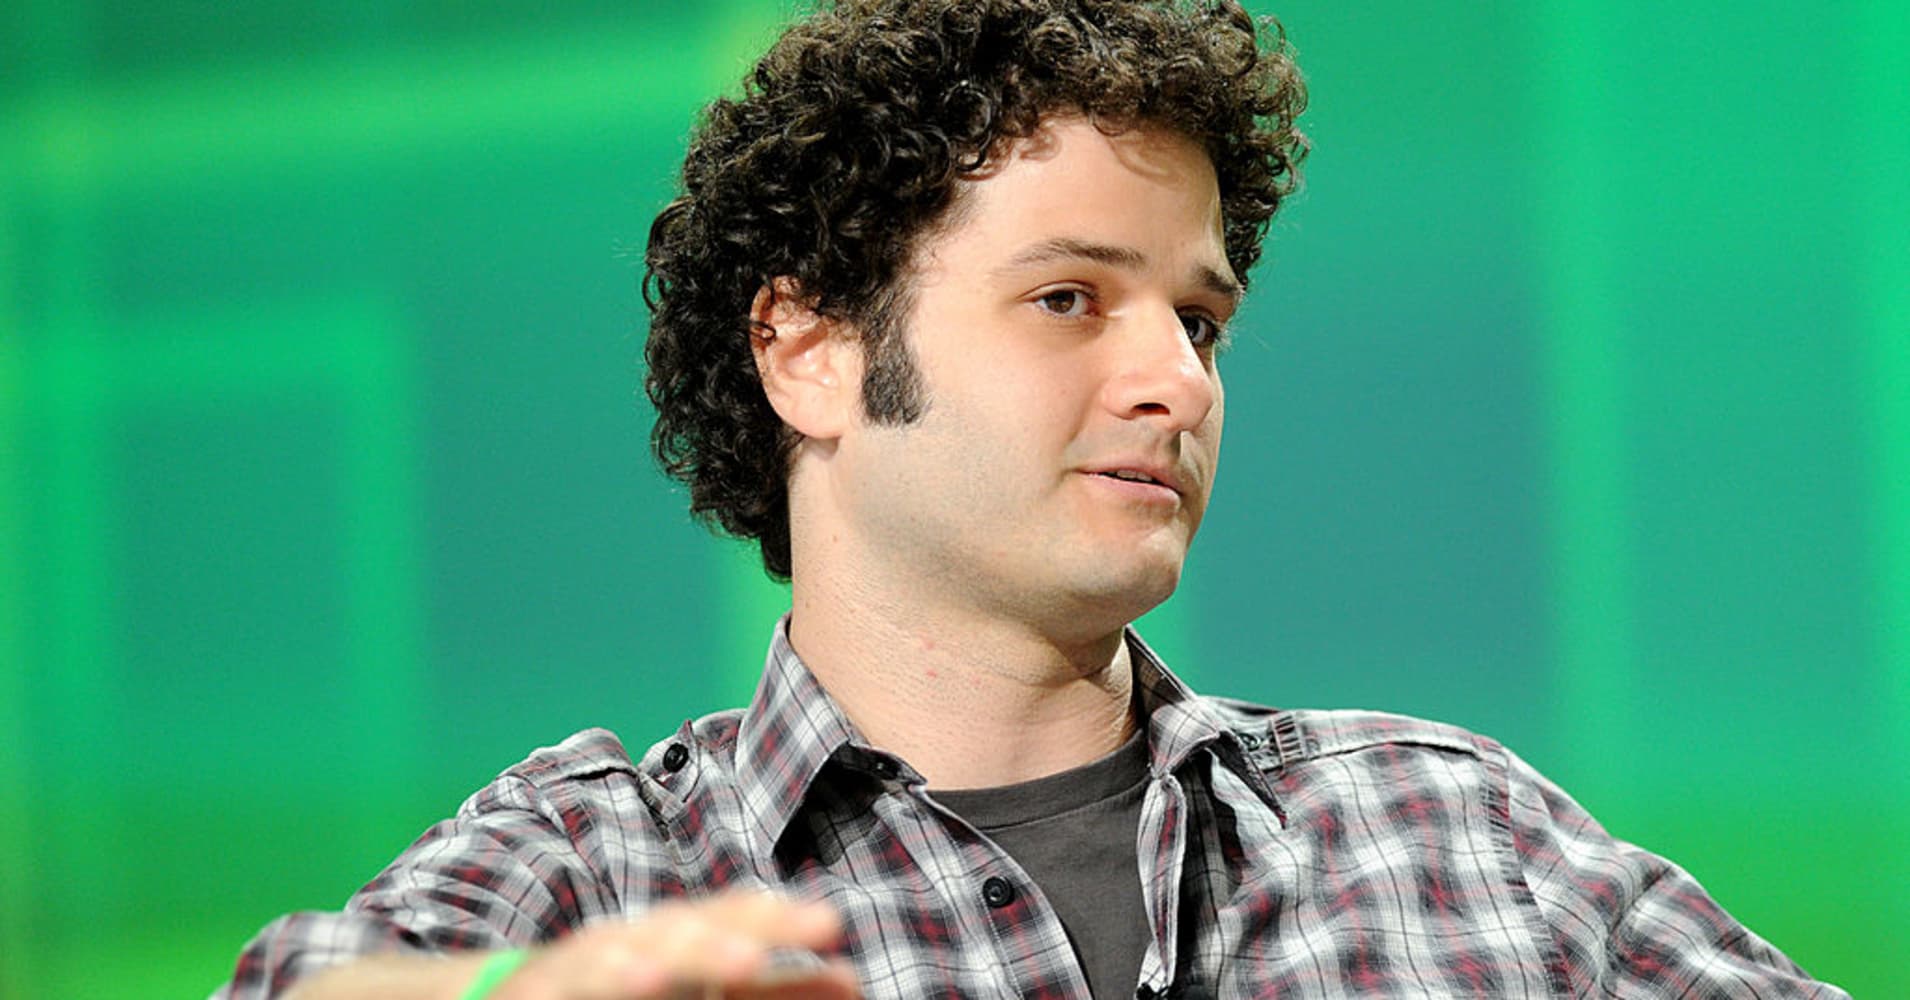 Facebook co-founder Dustin Moskovitz tells why he donated $20 million to defeat Donald ...